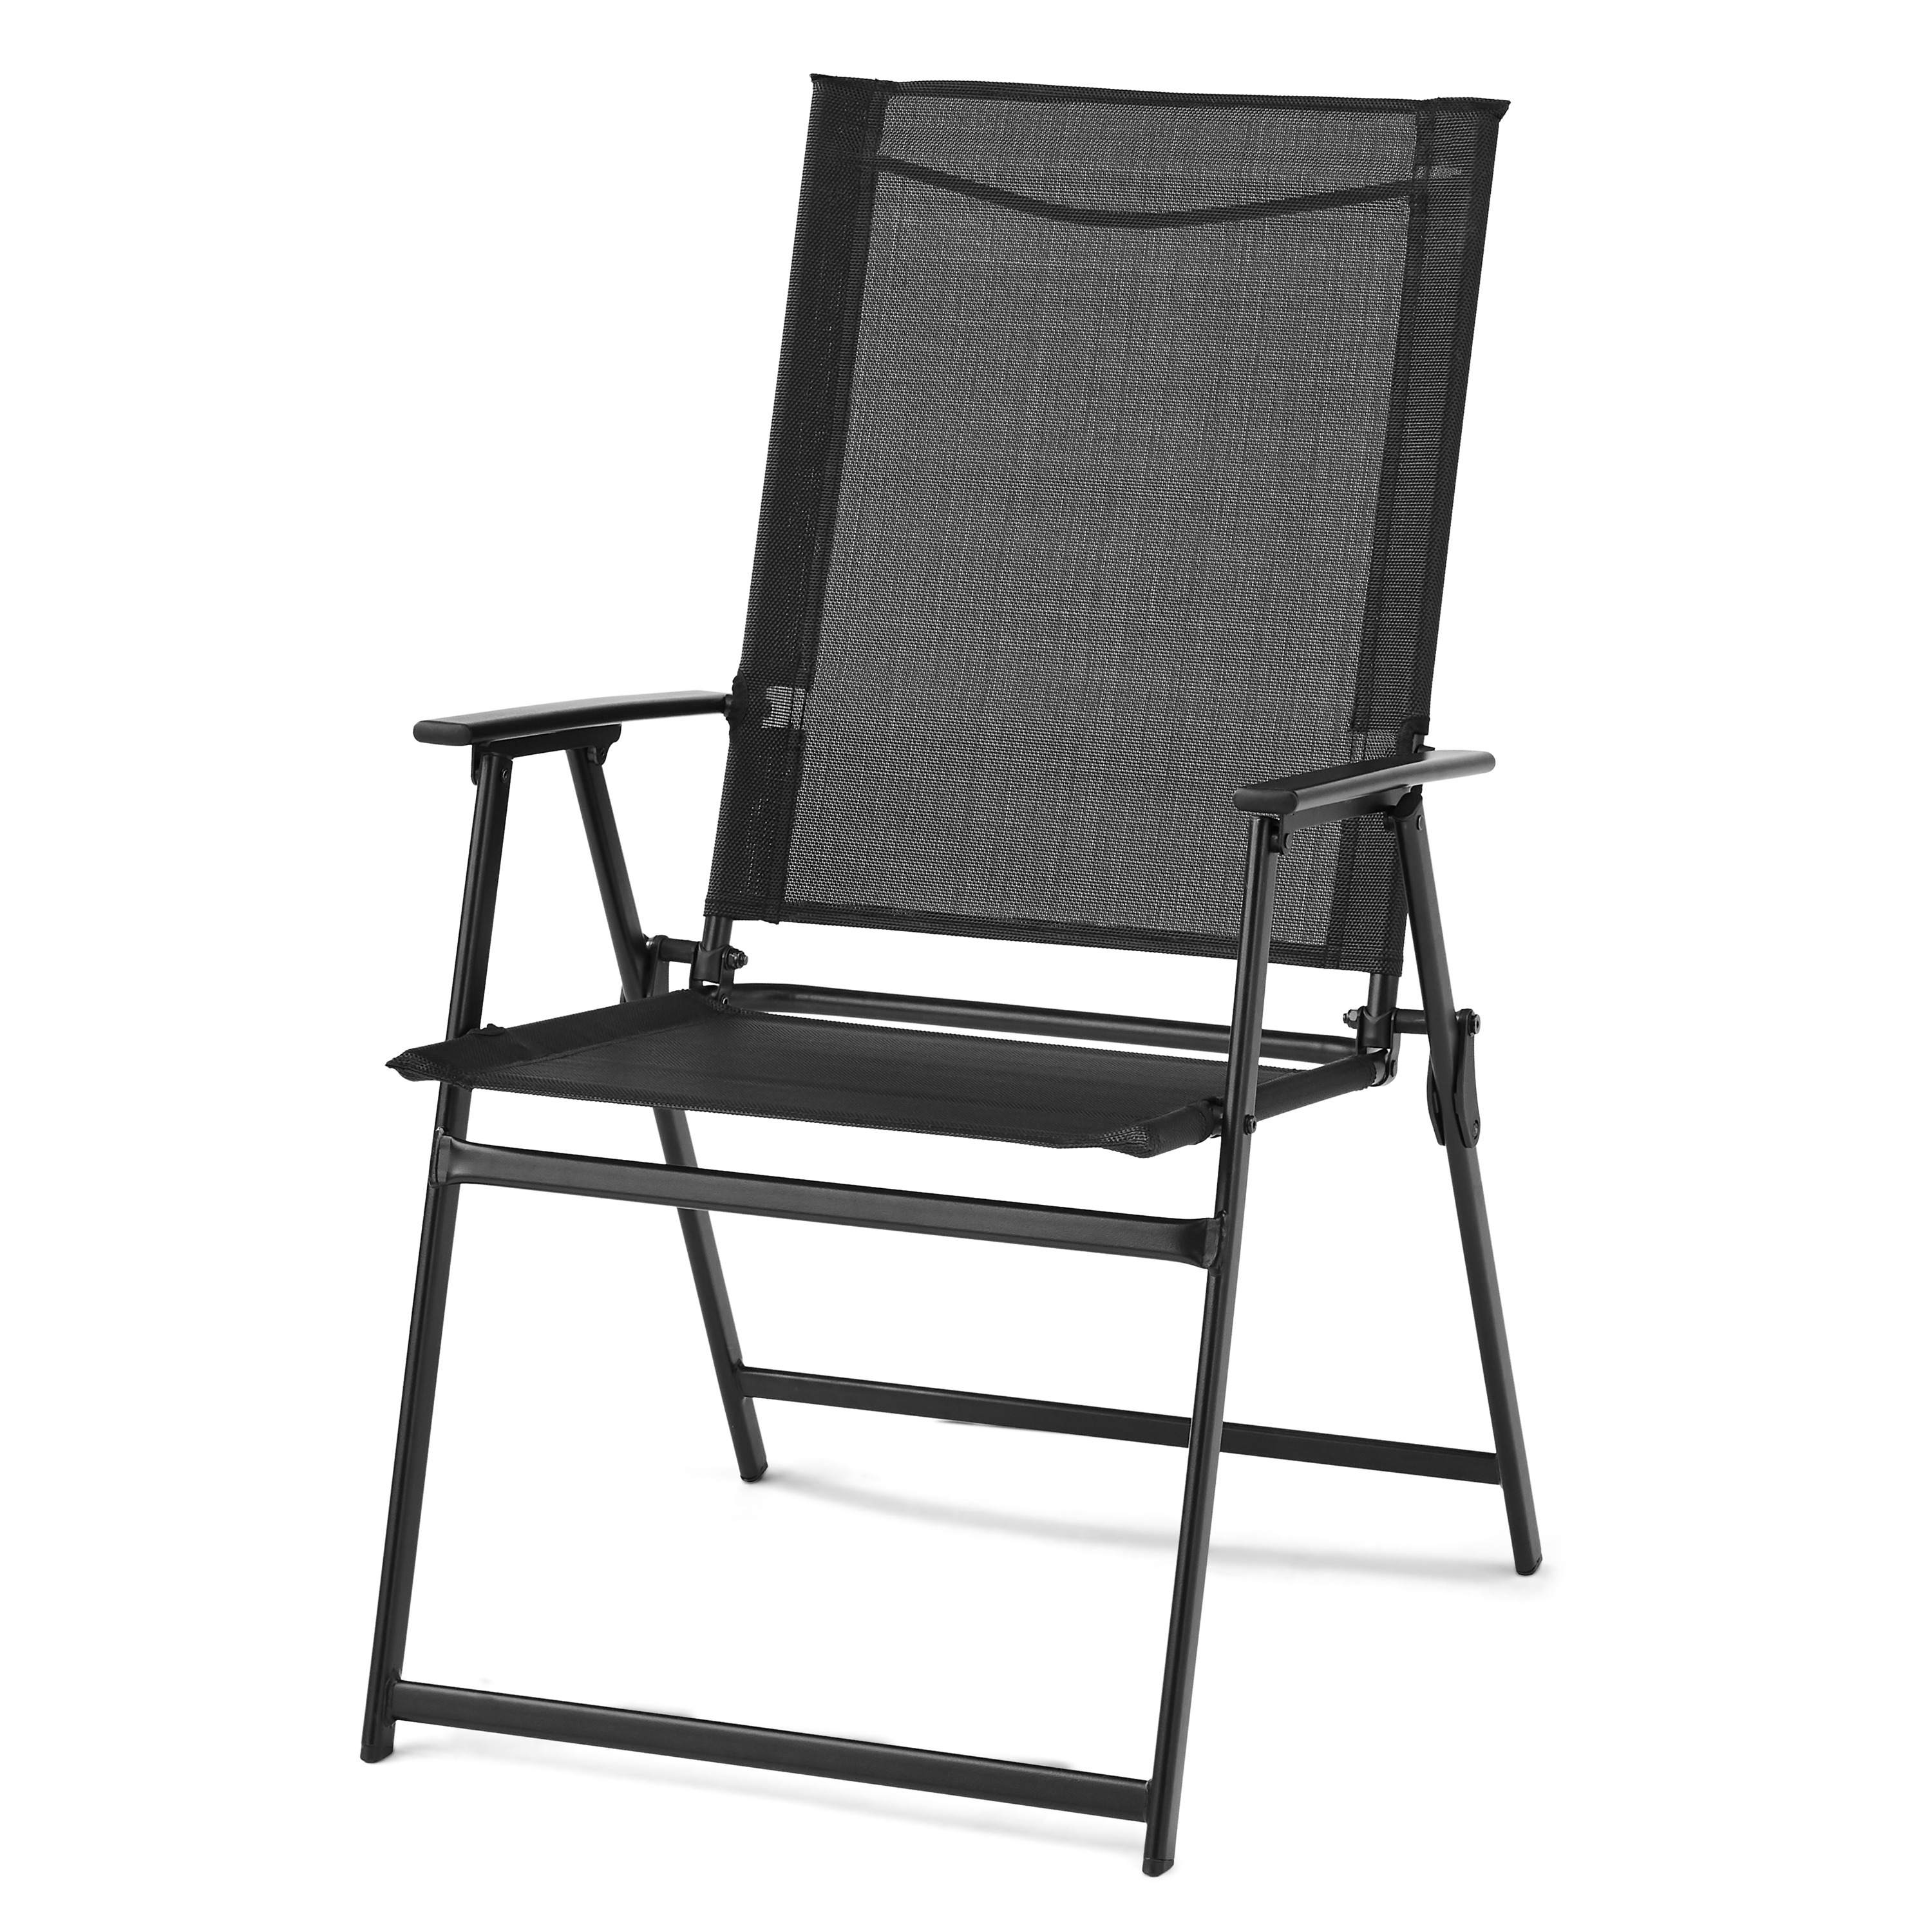 Mainstays Greyson Steel and Sling Folding Outdoor Patio Armchair - Set of 2, Black - image 3 of 8